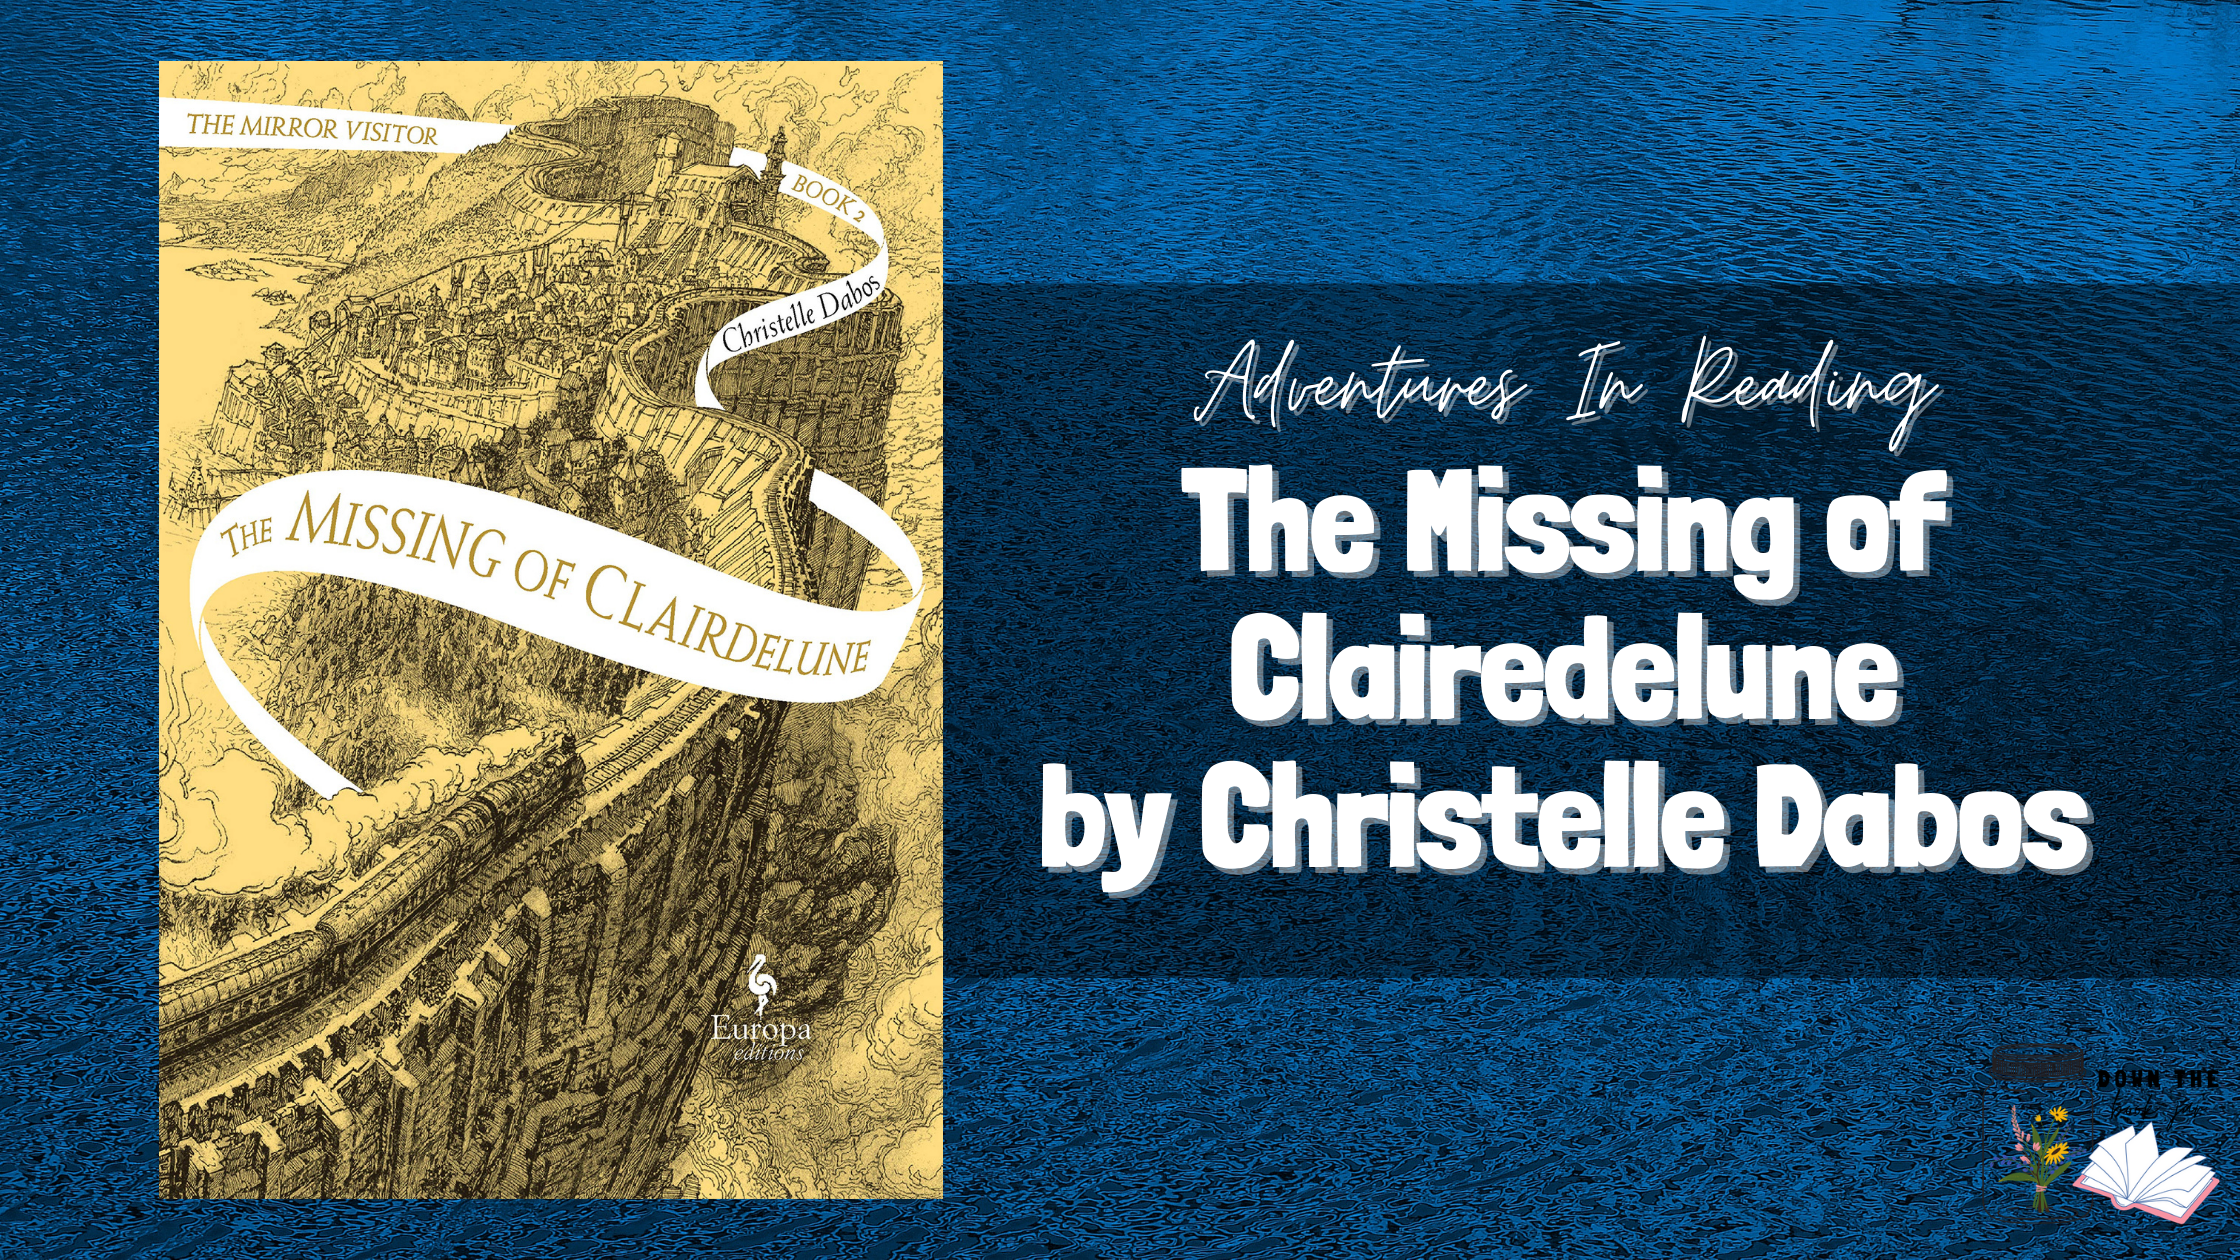 The Missing of Clairedelune by Christelle Dabos